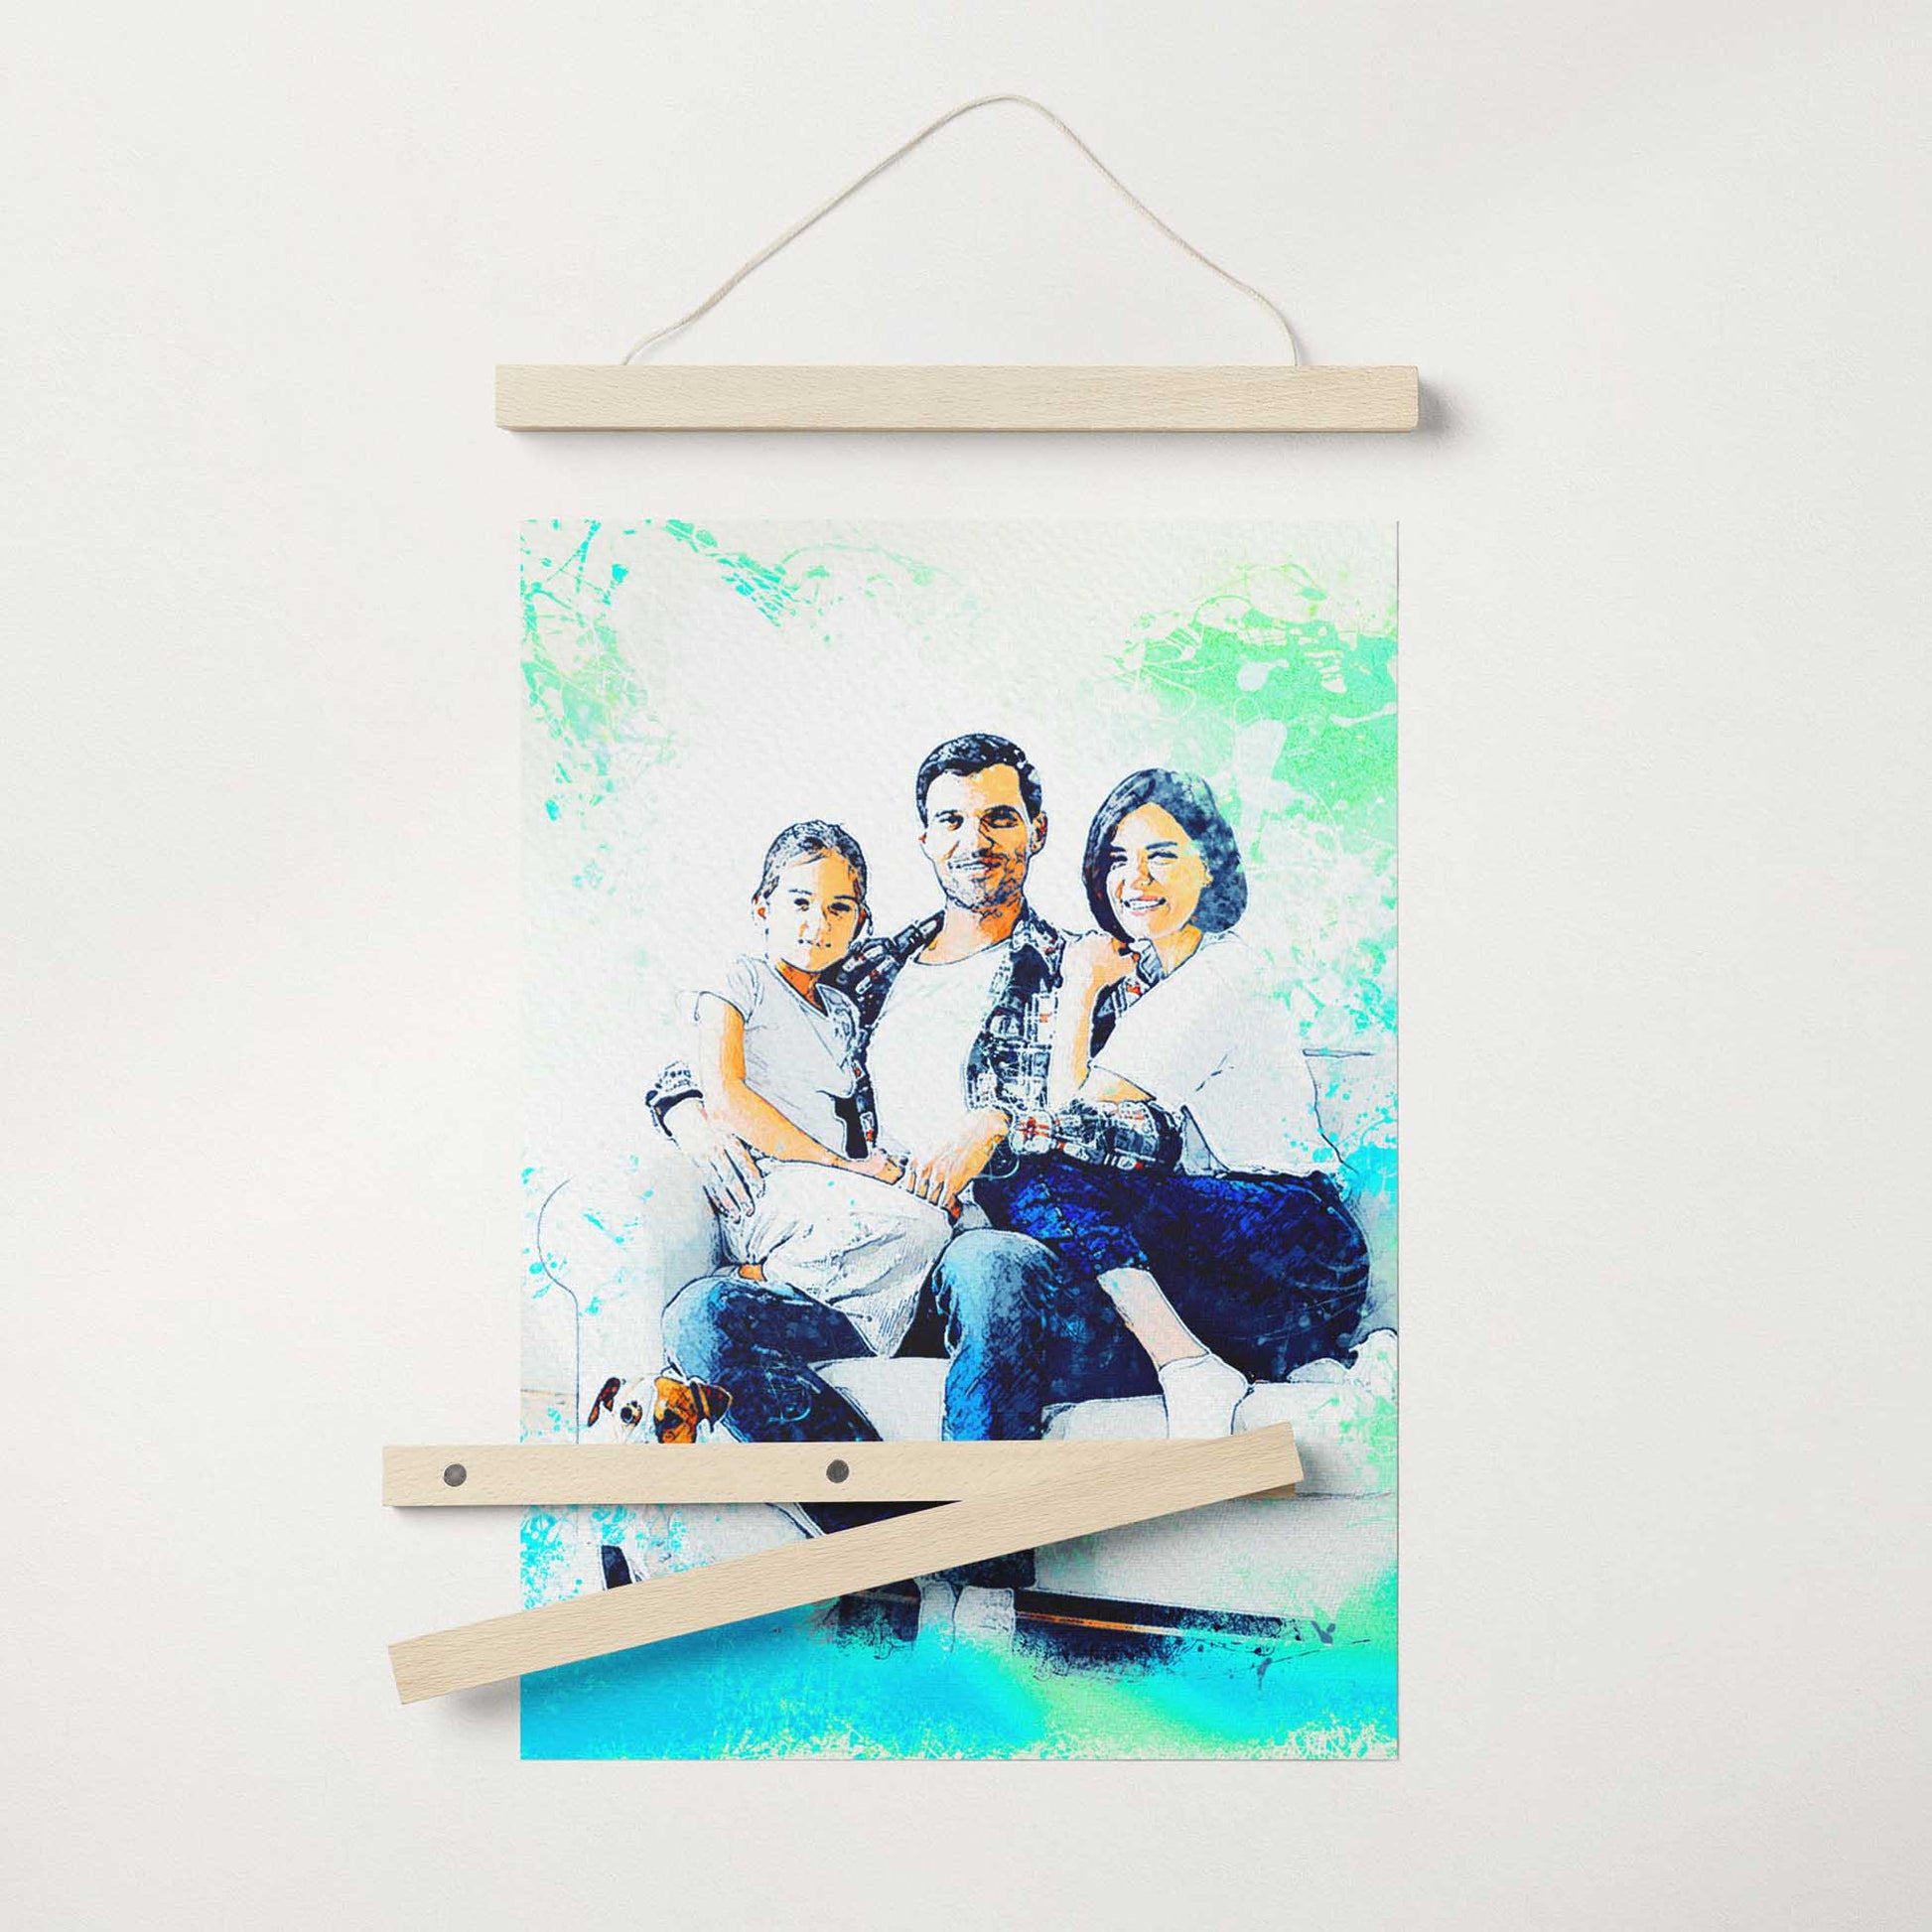 Make a statement with the Personalised Watercolor Splash Poster Hanger. Its fresh and vibrant colors, created using an authentic watercolour style and bold paint splash, capture attention and add a cool and artistic flair to any space